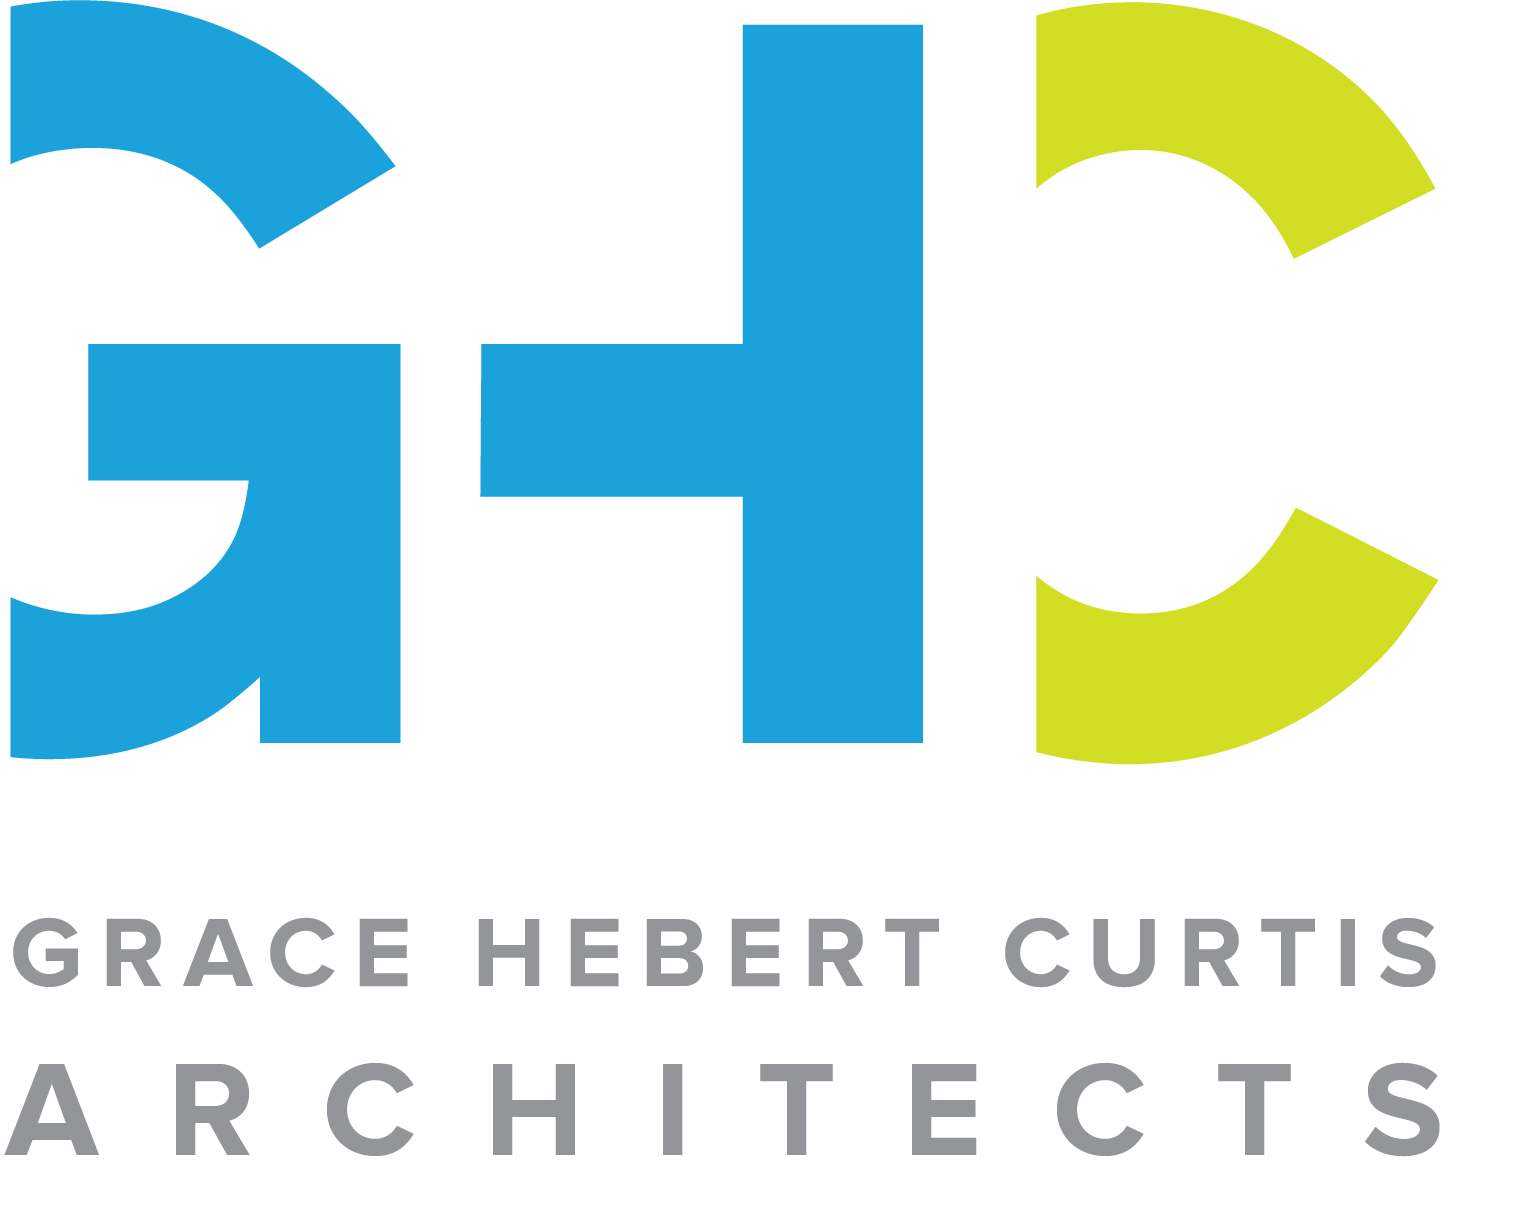 GHC Architects